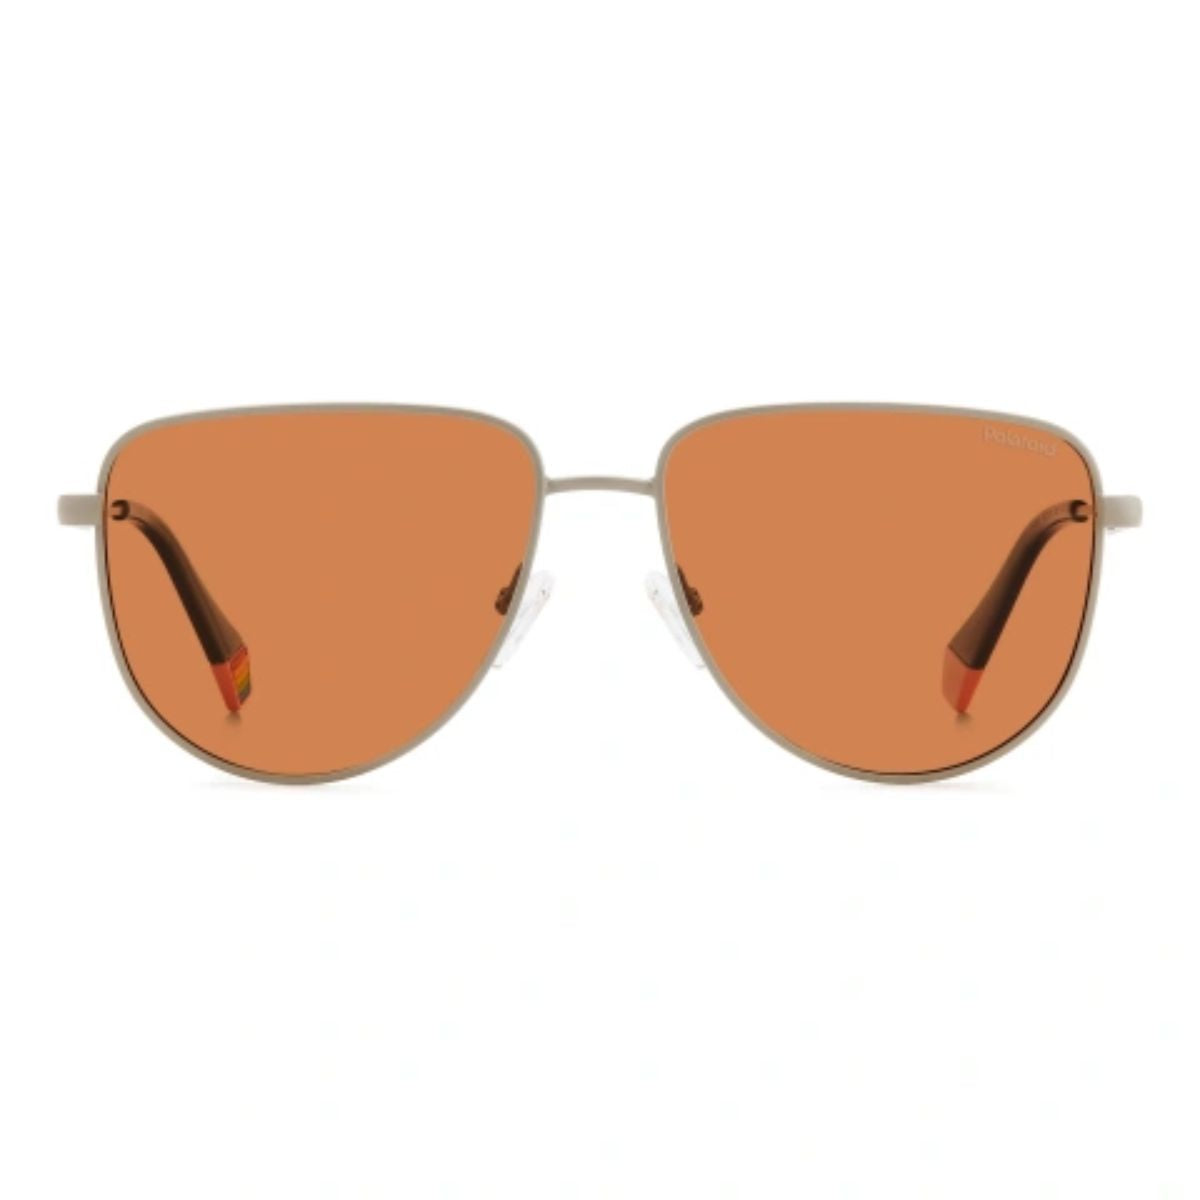 "Top-Rated Polarized Sunglasses For Both Men & Women At Optorium"